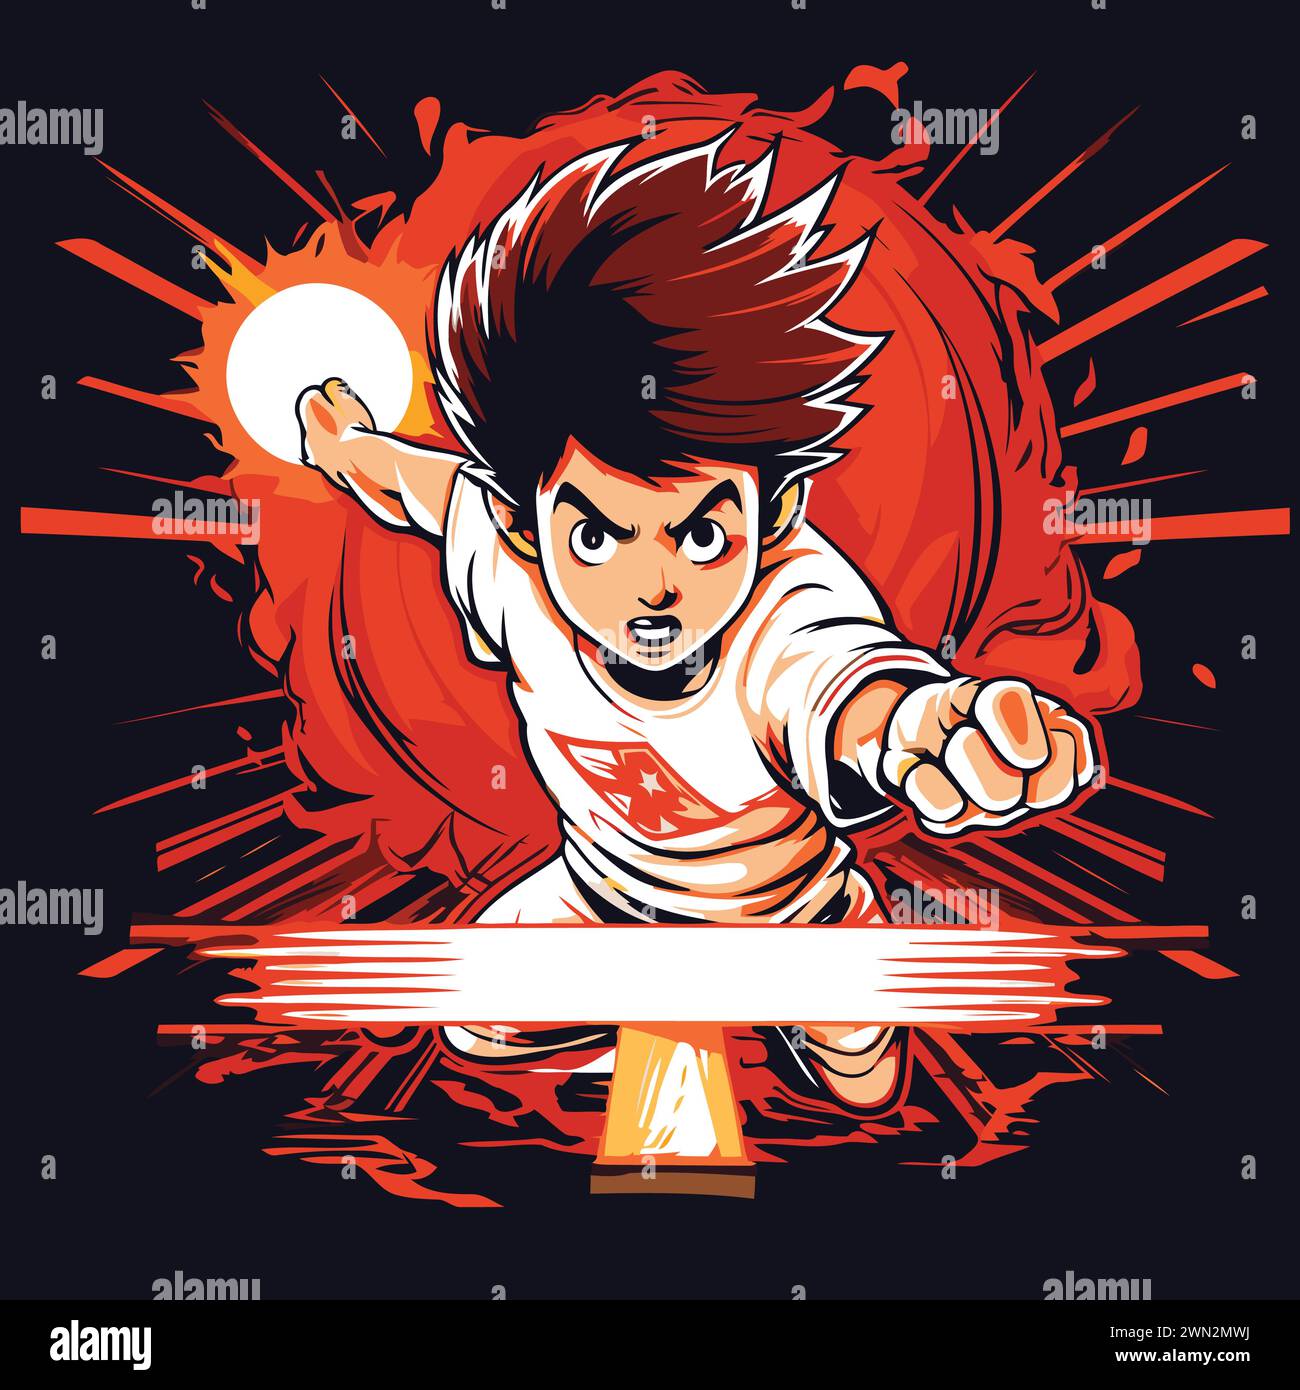 Cartoon illustration of a young man playing table tennis. Ideal for t-shirt print or poster design. Stock Vector